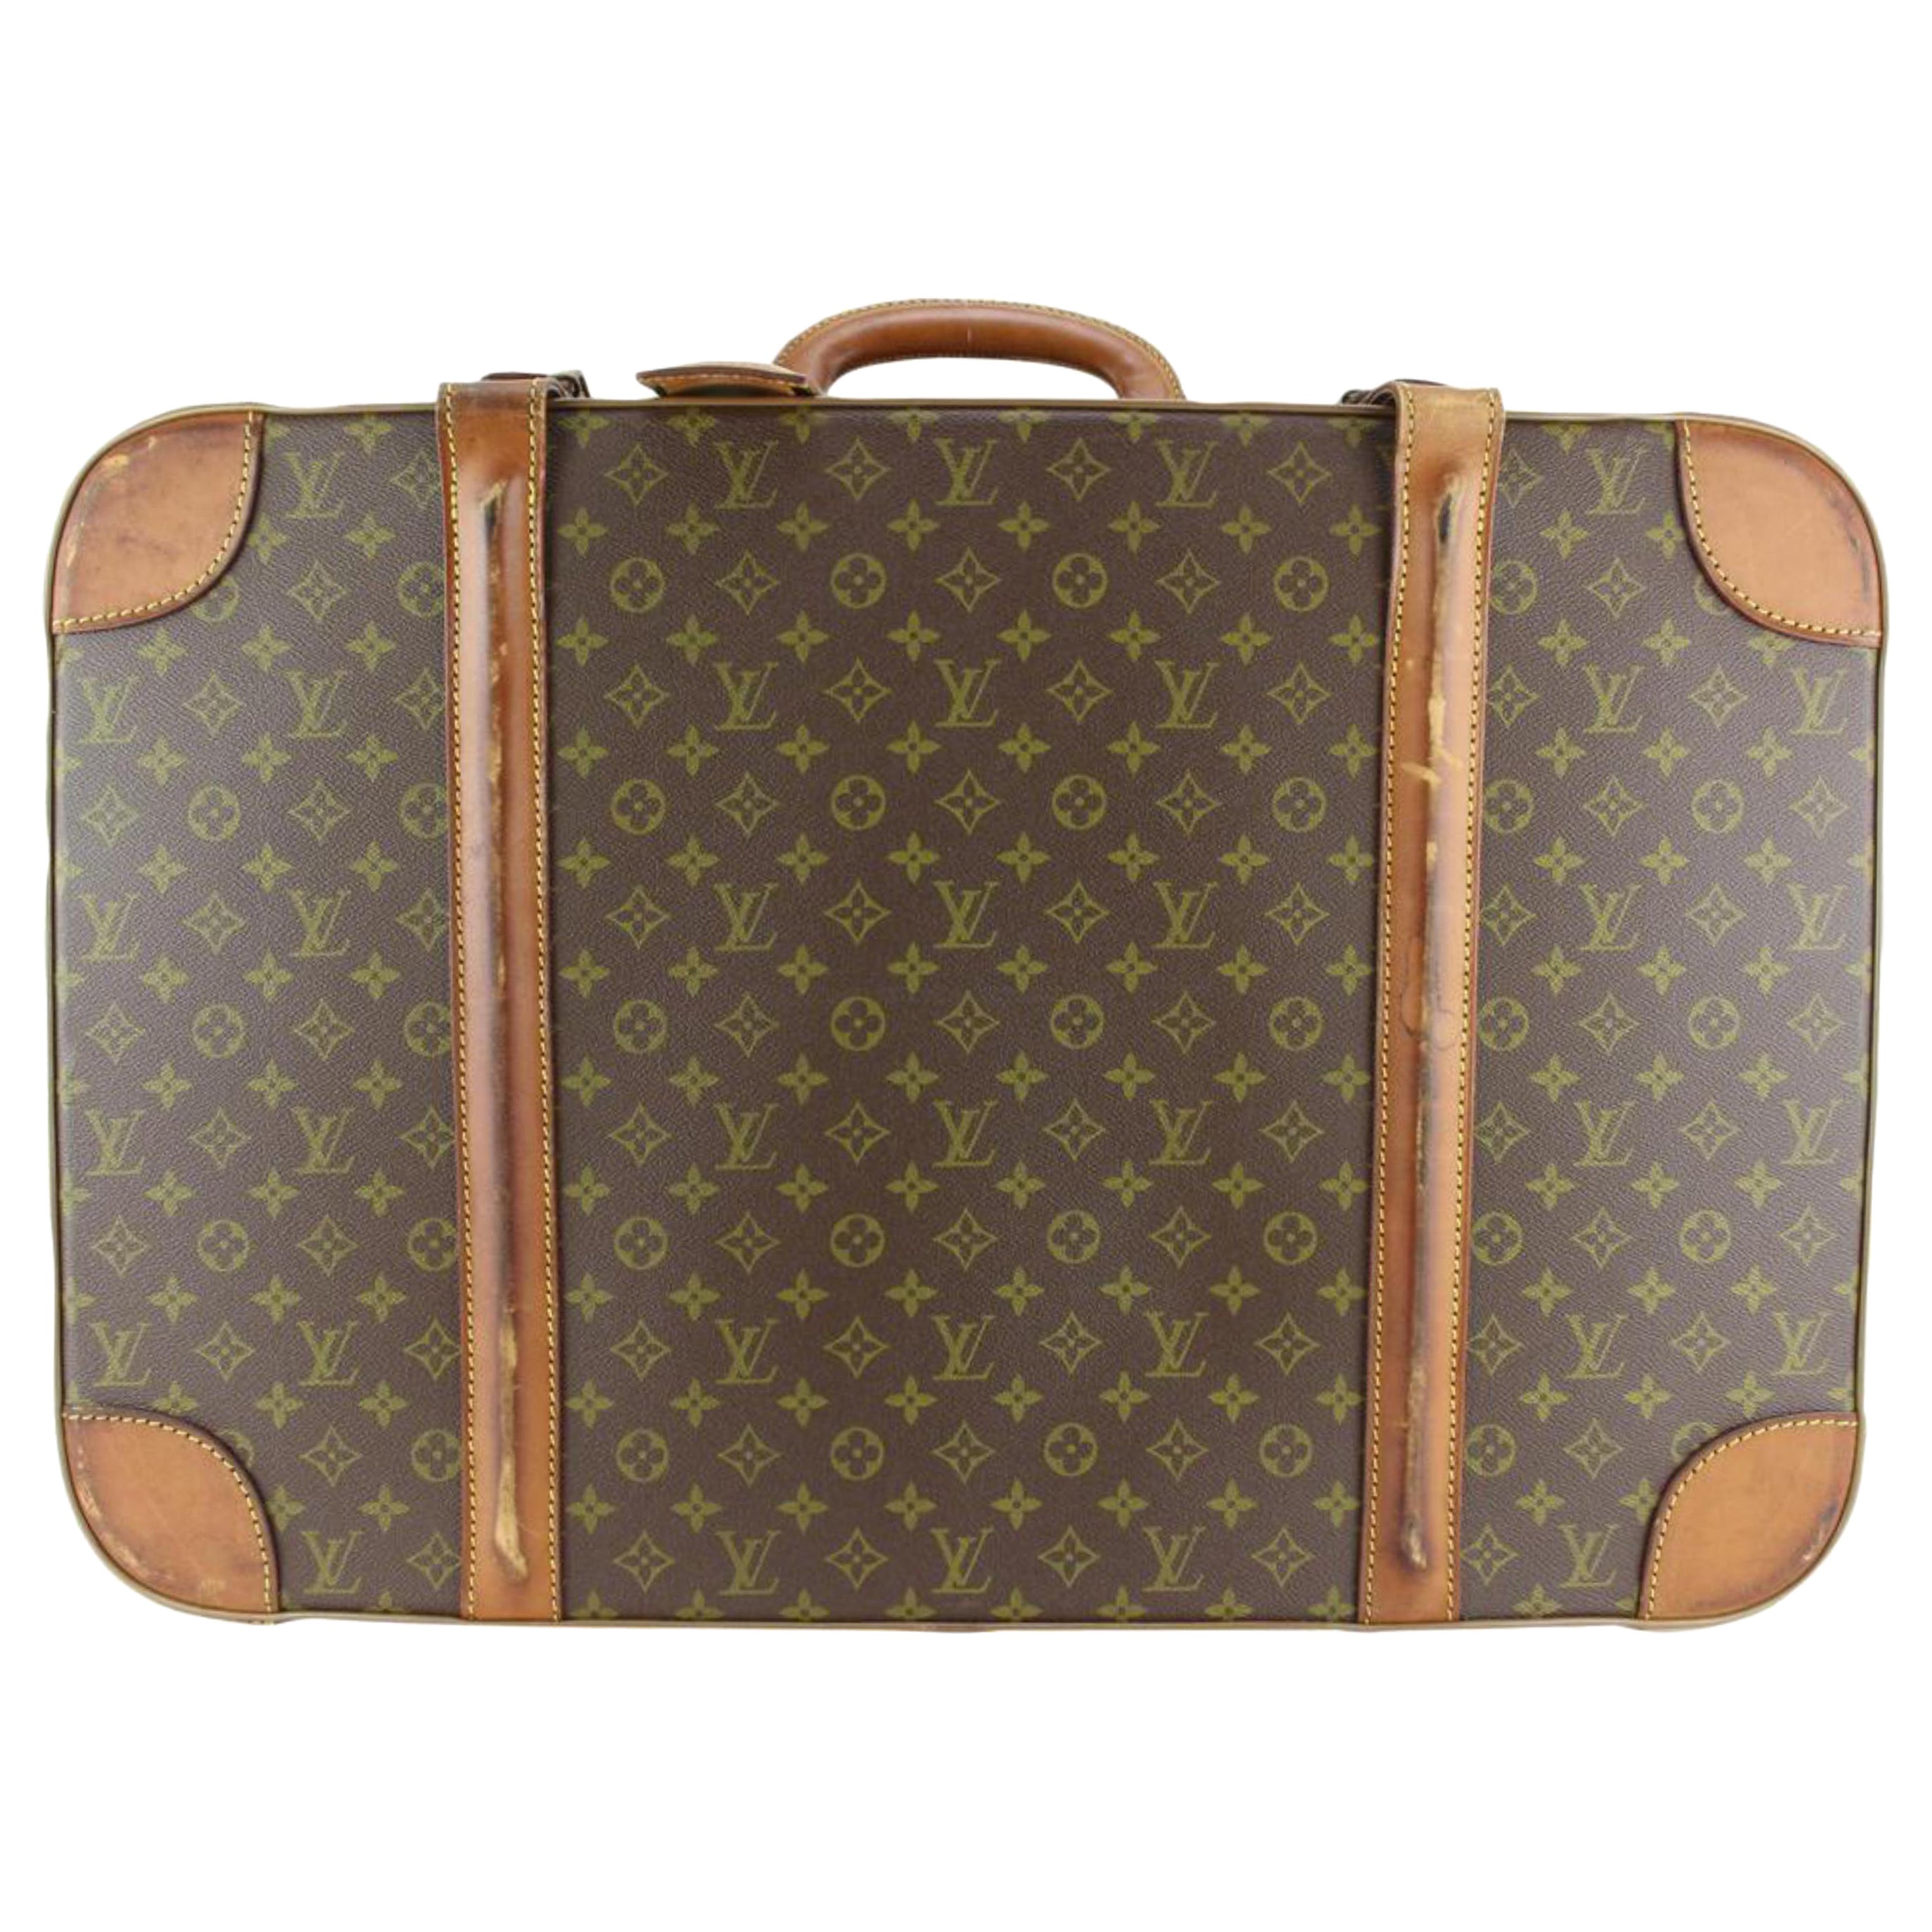 Louis Vuitton XL Dust Bag Draw String Old Style Luggage or garment bag cover